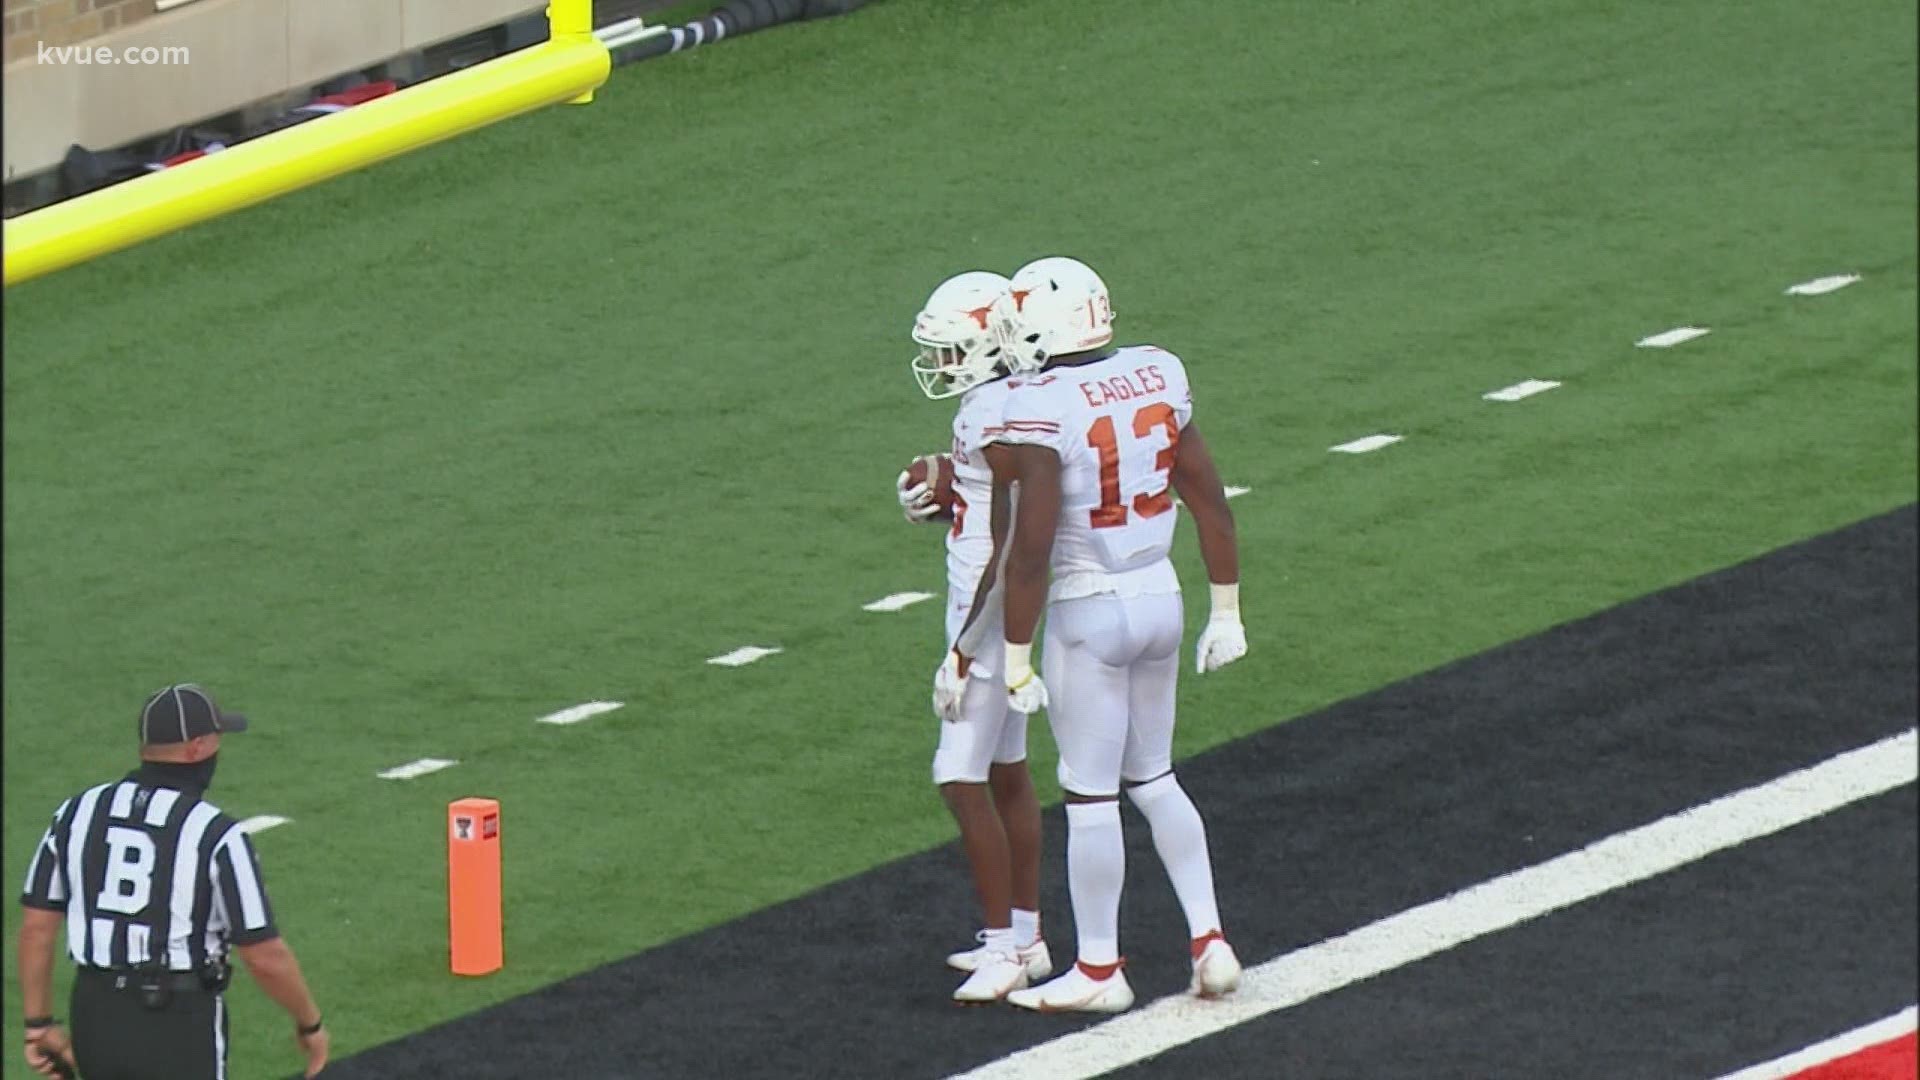 Texas Longhorns WR Joshua Moore leads UT with four receiving touchdowns in the 2020 season through the first two games.